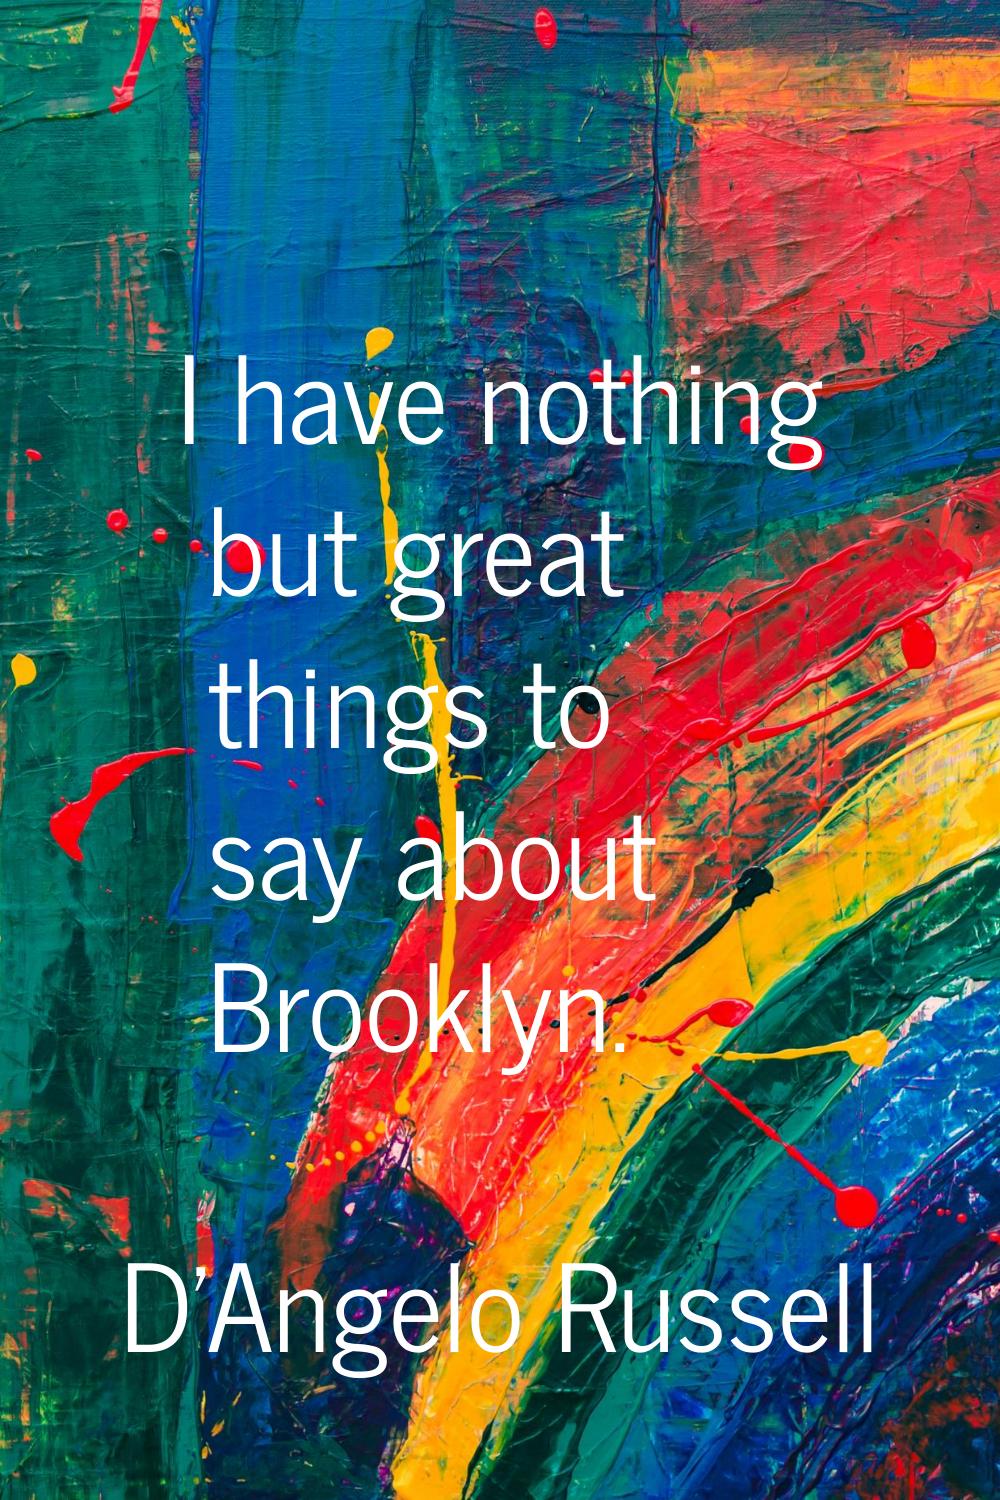 I have nothing but great things to say about Brooklyn.